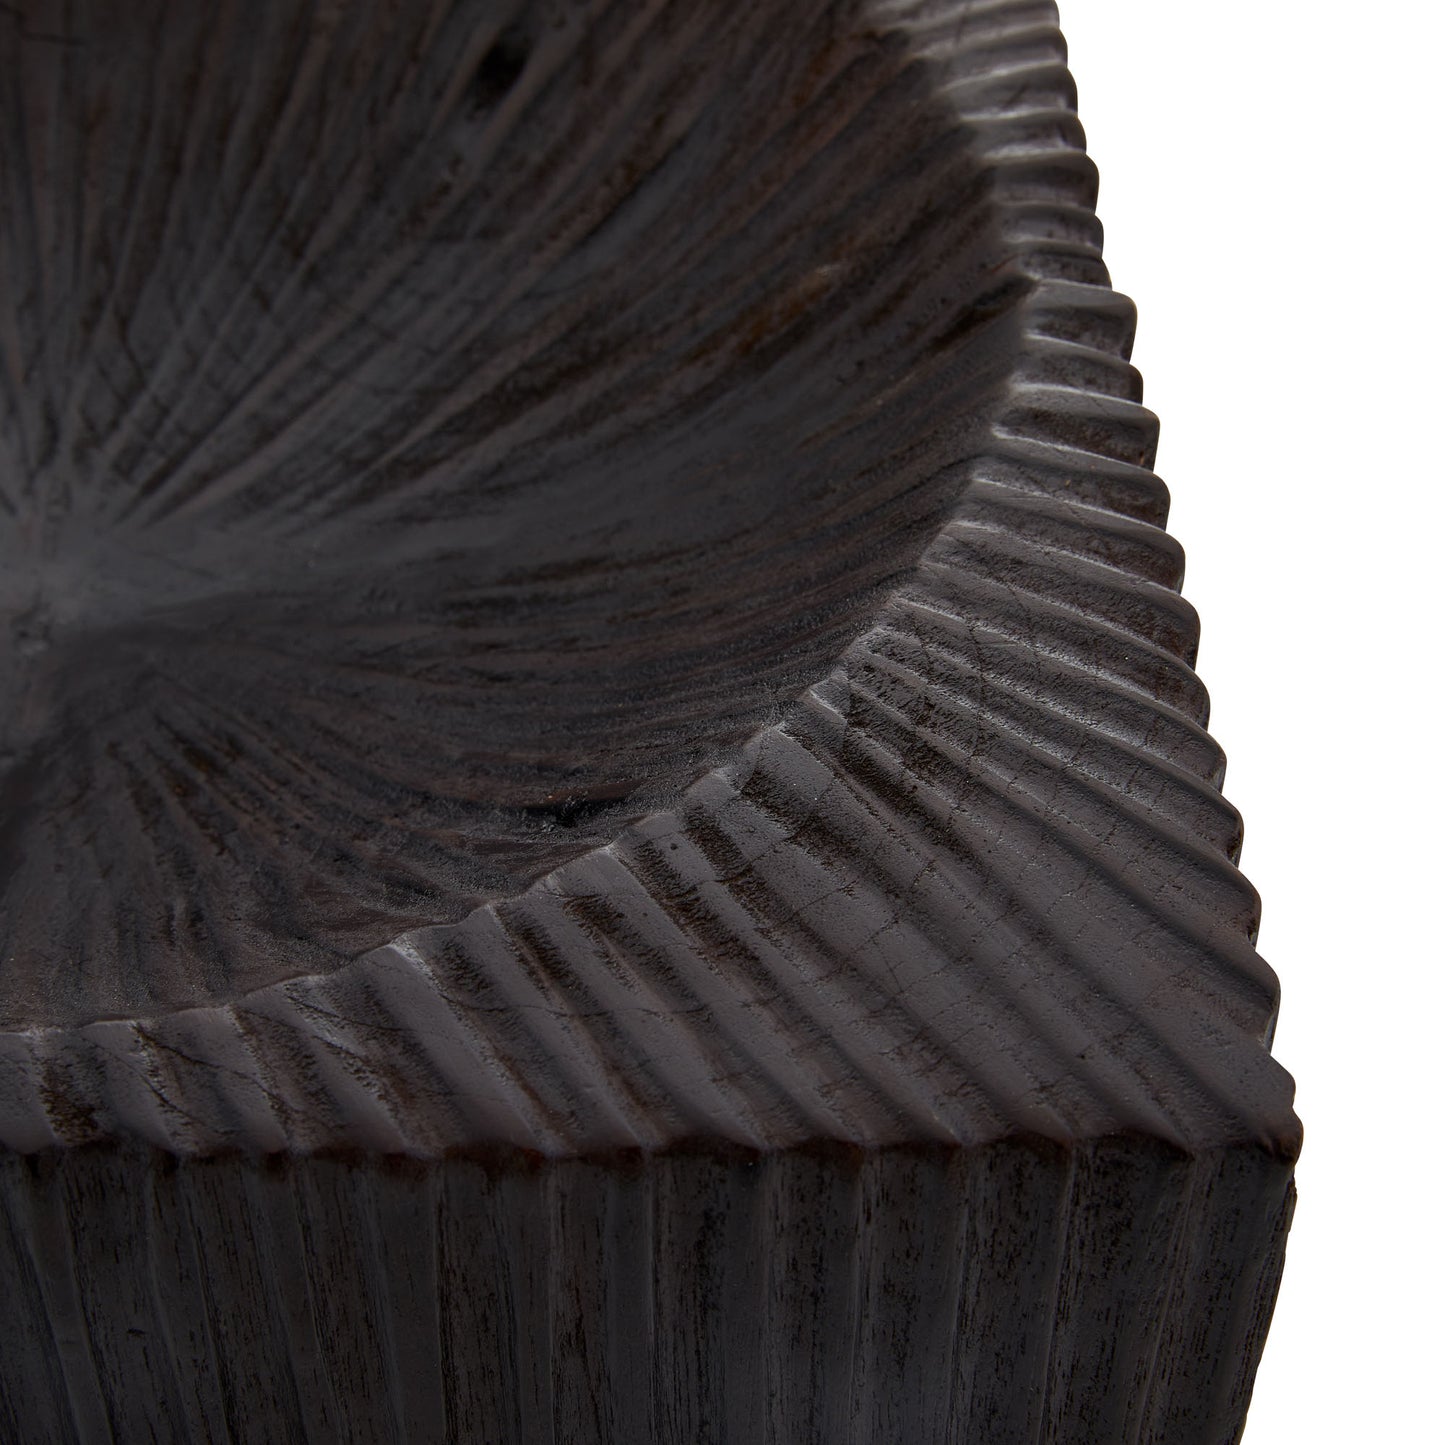 Malak Centerpiece - Handcrafted Umber Mahogany Wood with Rich Carvings and Stout Square Legs